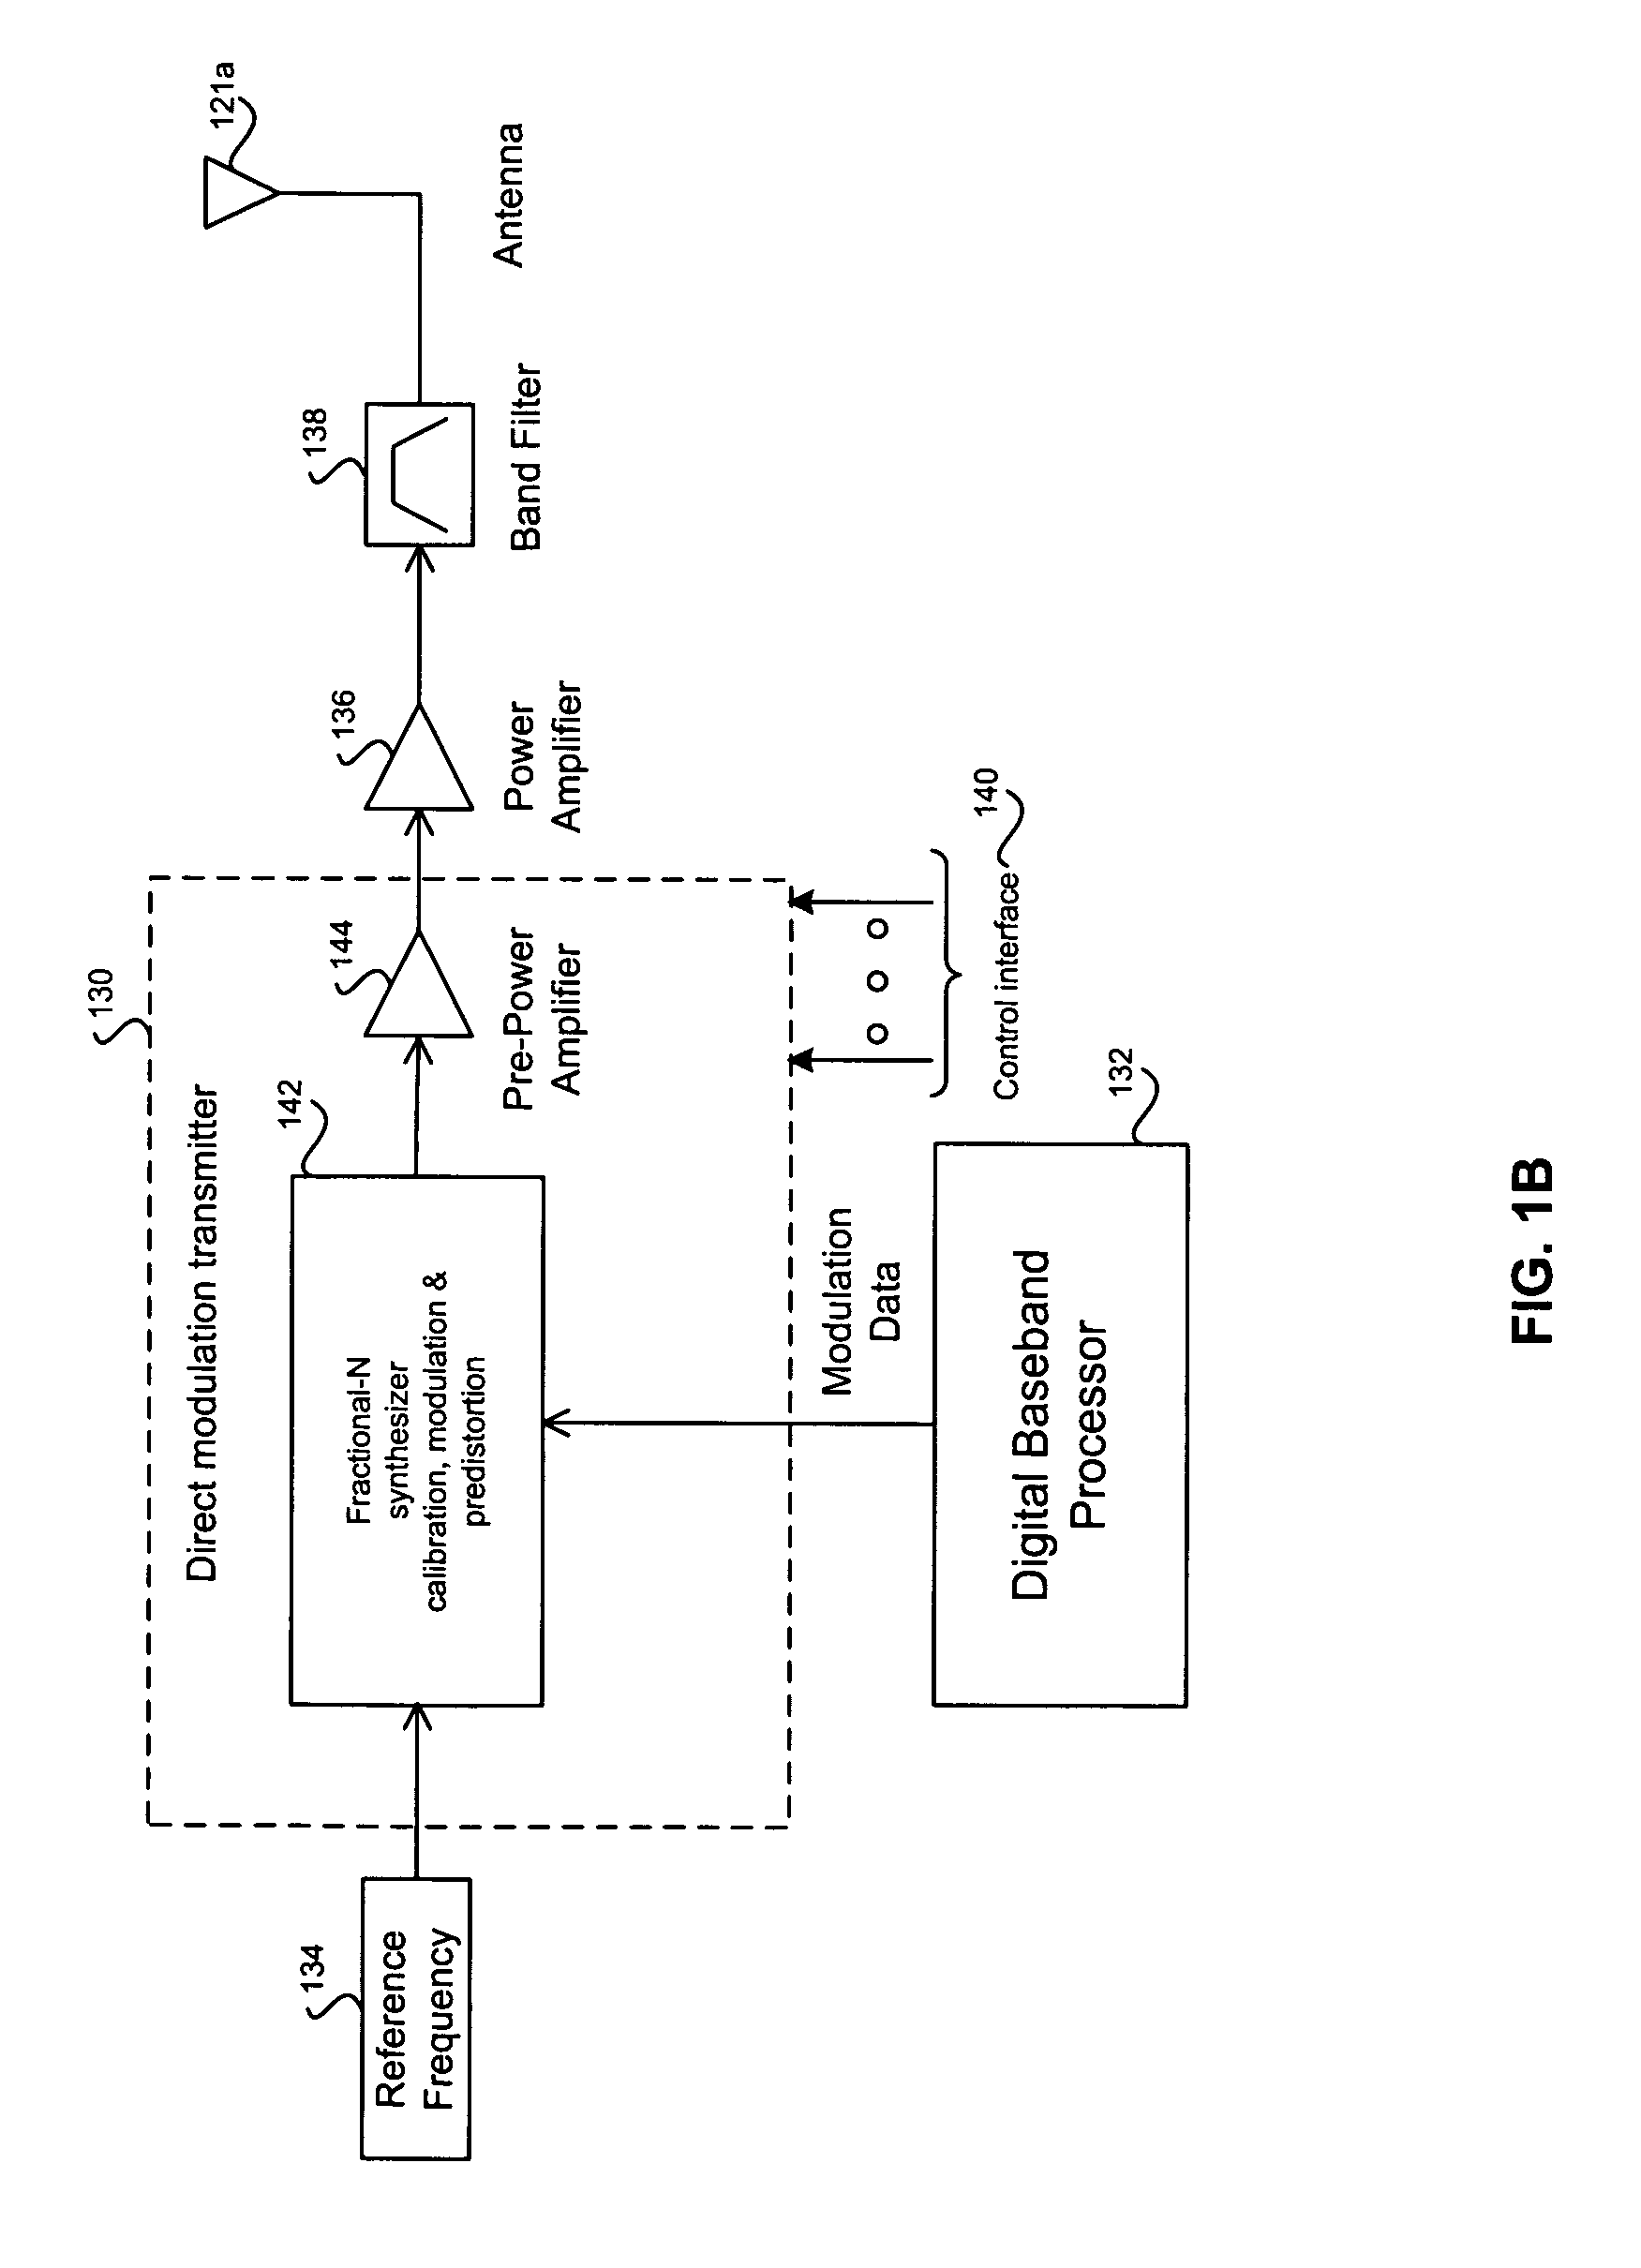 Method and system for bandwidth calibration for a phase locked loop (PLL)